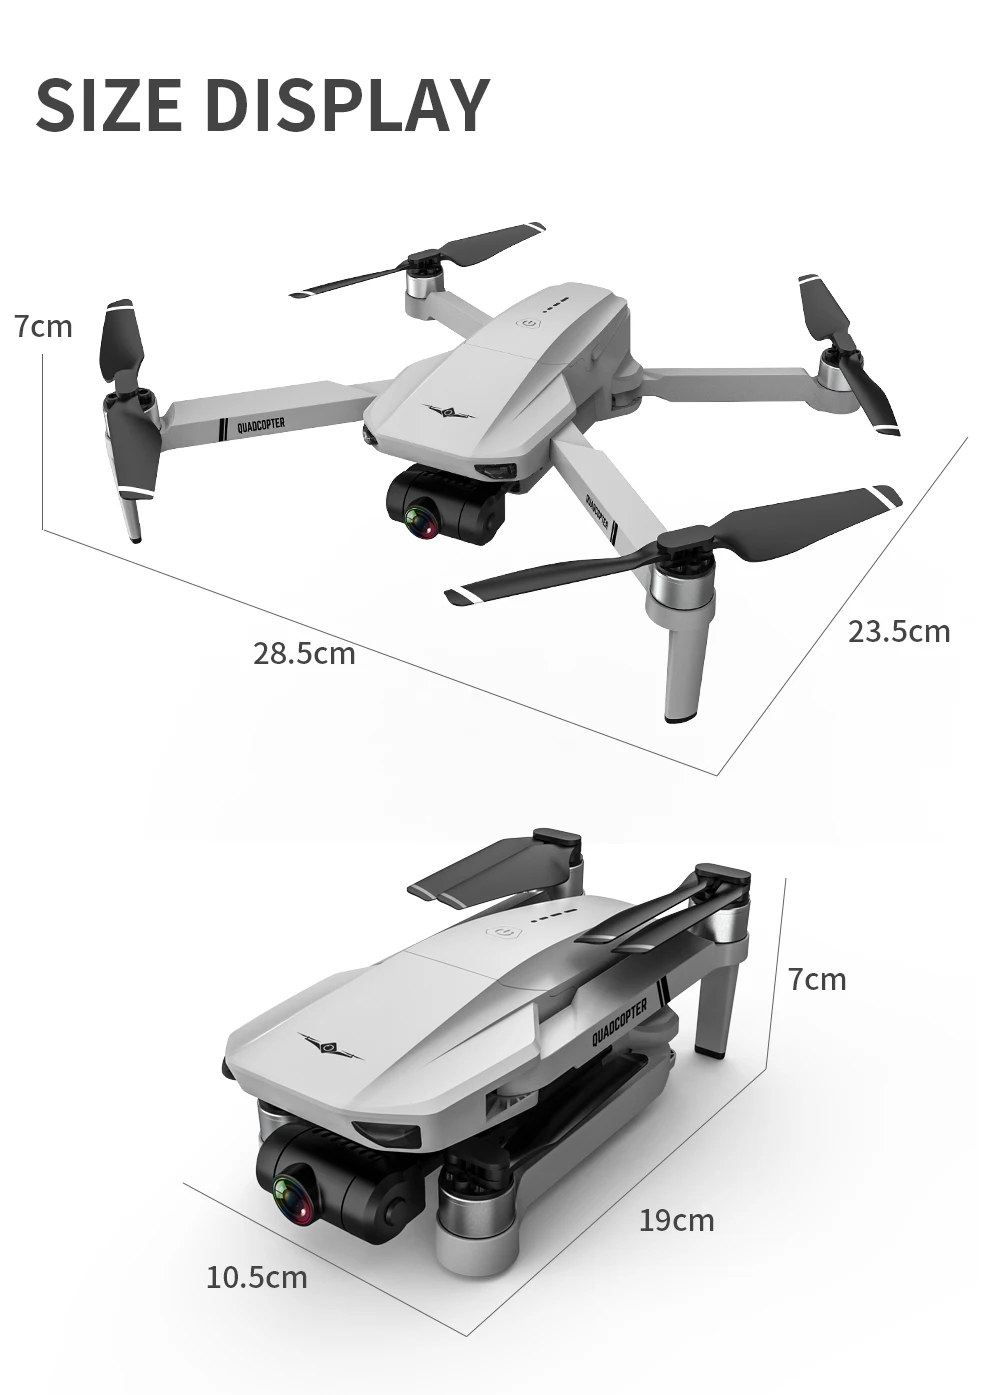 New KF102 Max GPS Drone 8K HD EIS Camera 2-Axis Gimbal Profesional Laser Obstacle Avoidance Quadcopter Brushless WiFi FPV Dron toy helicopter price